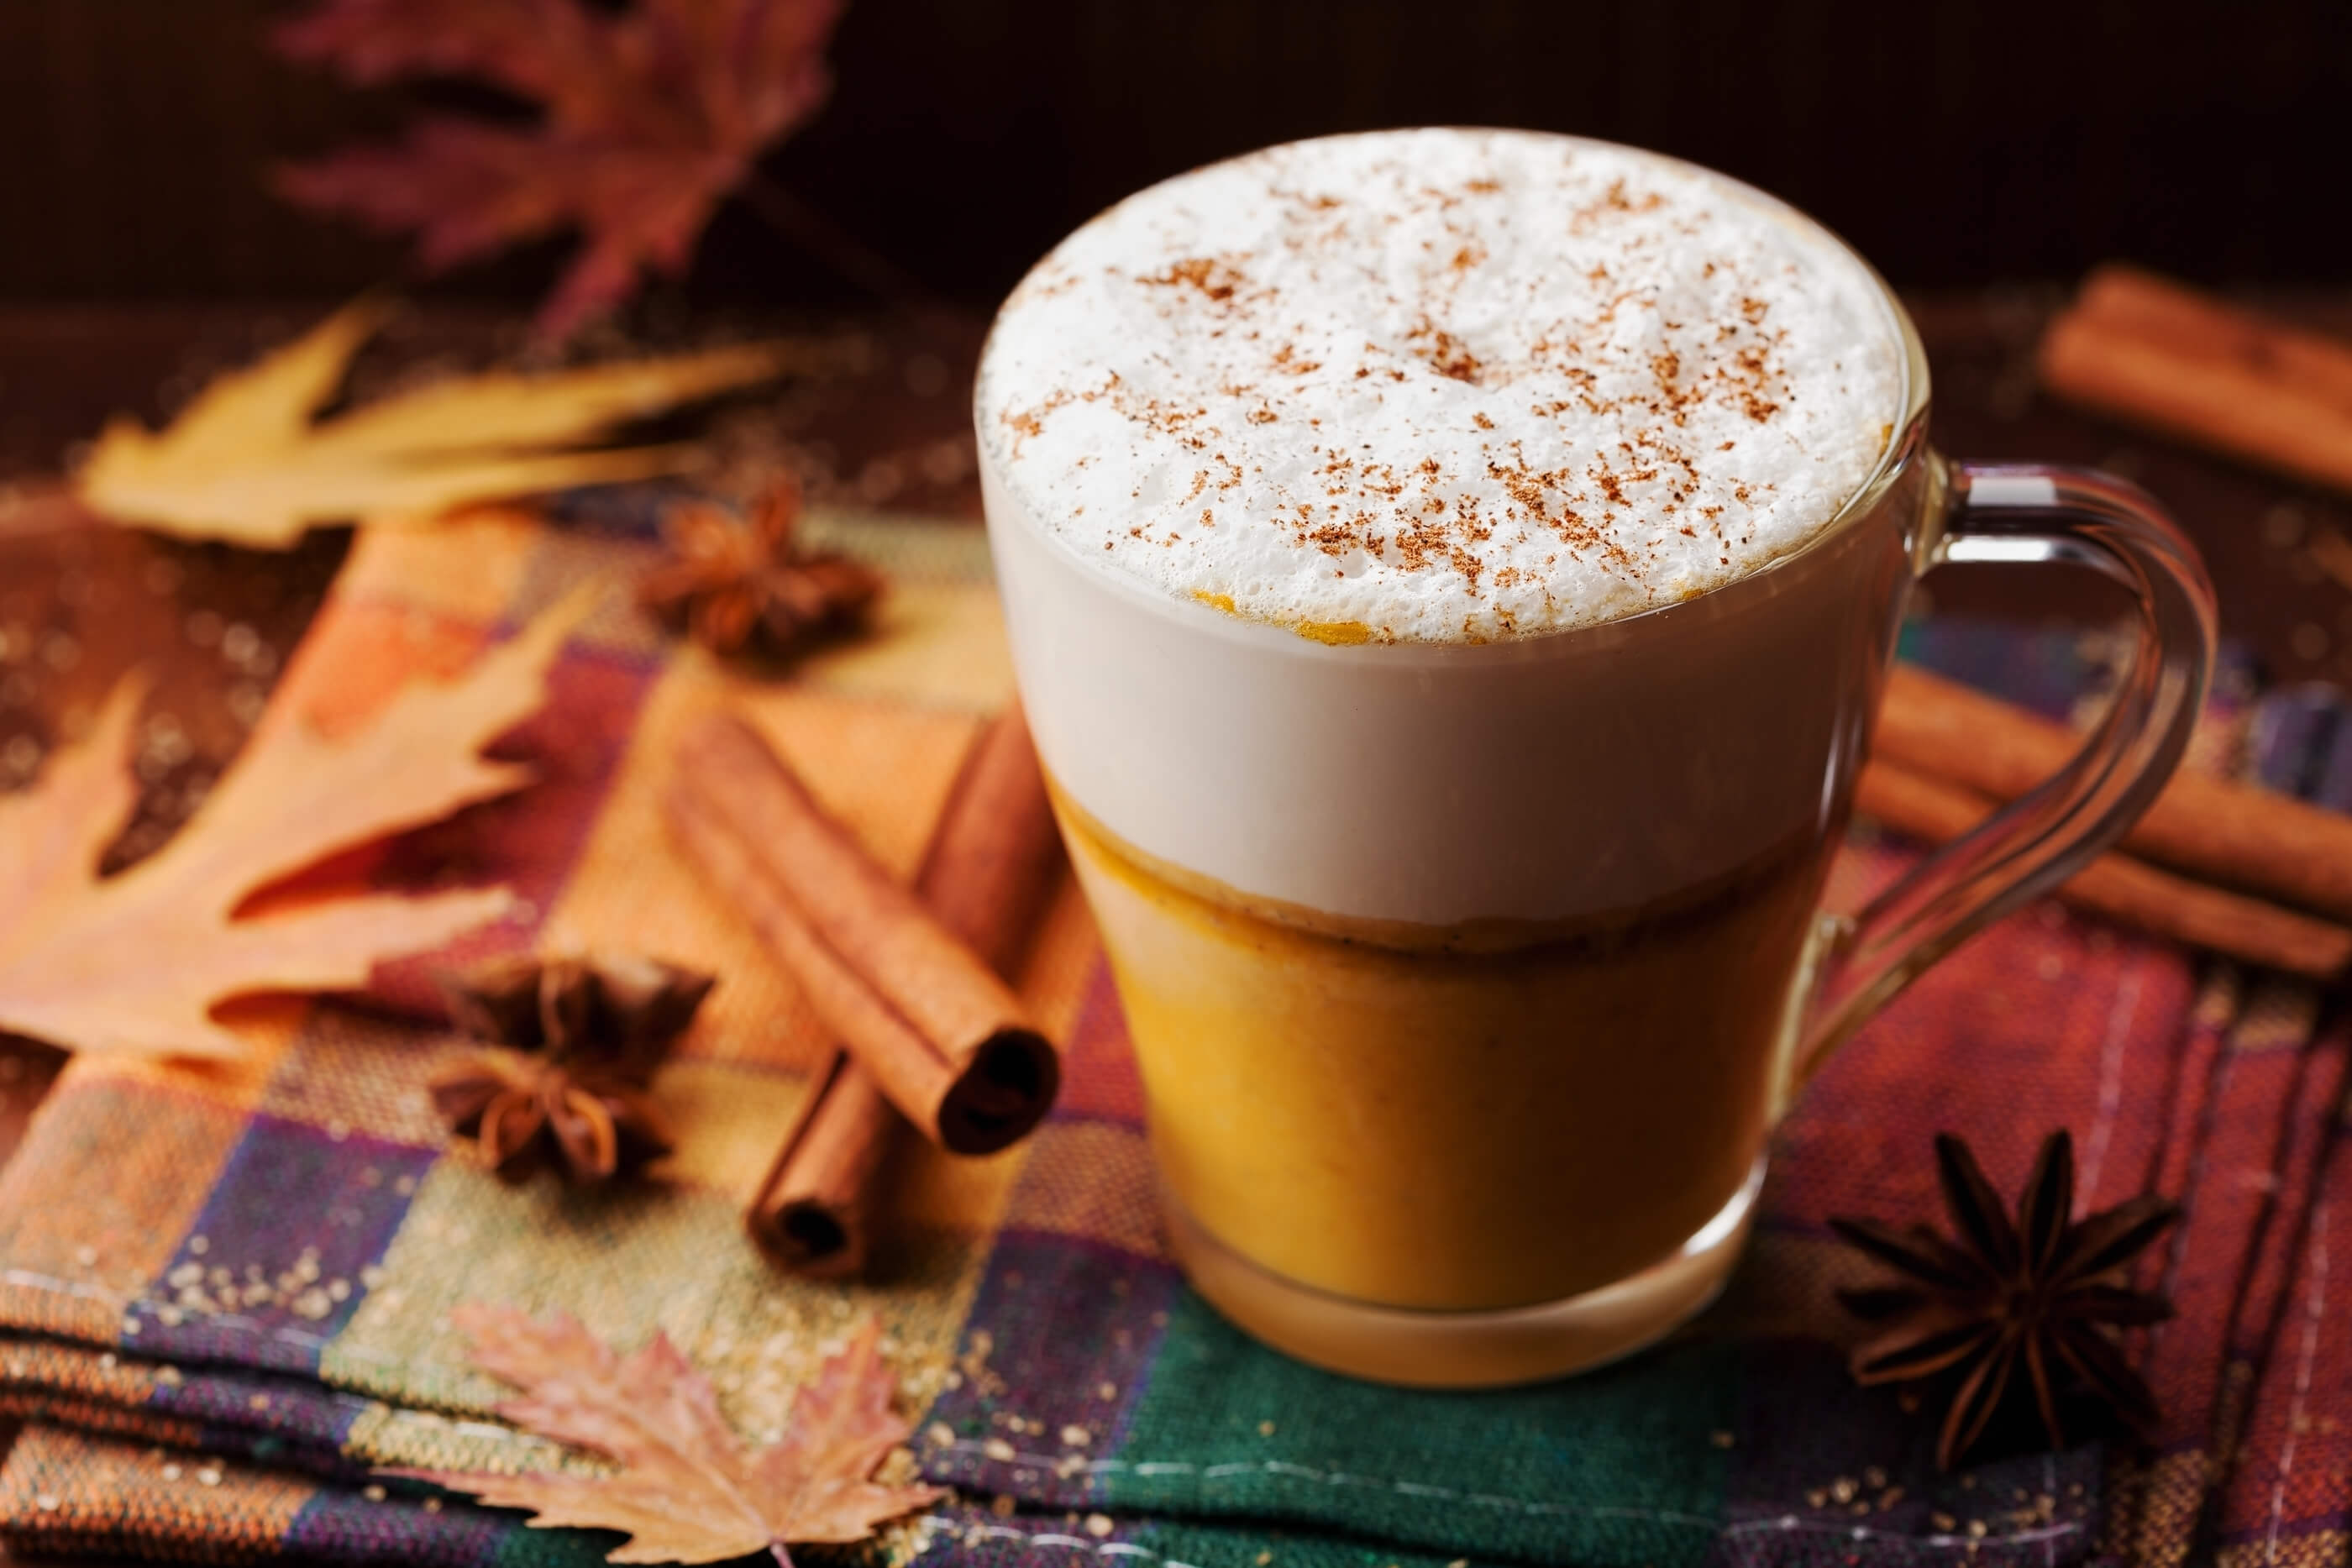 Forget Pumpkin Spice! We’re Making Sweet Potato Lattes Down South